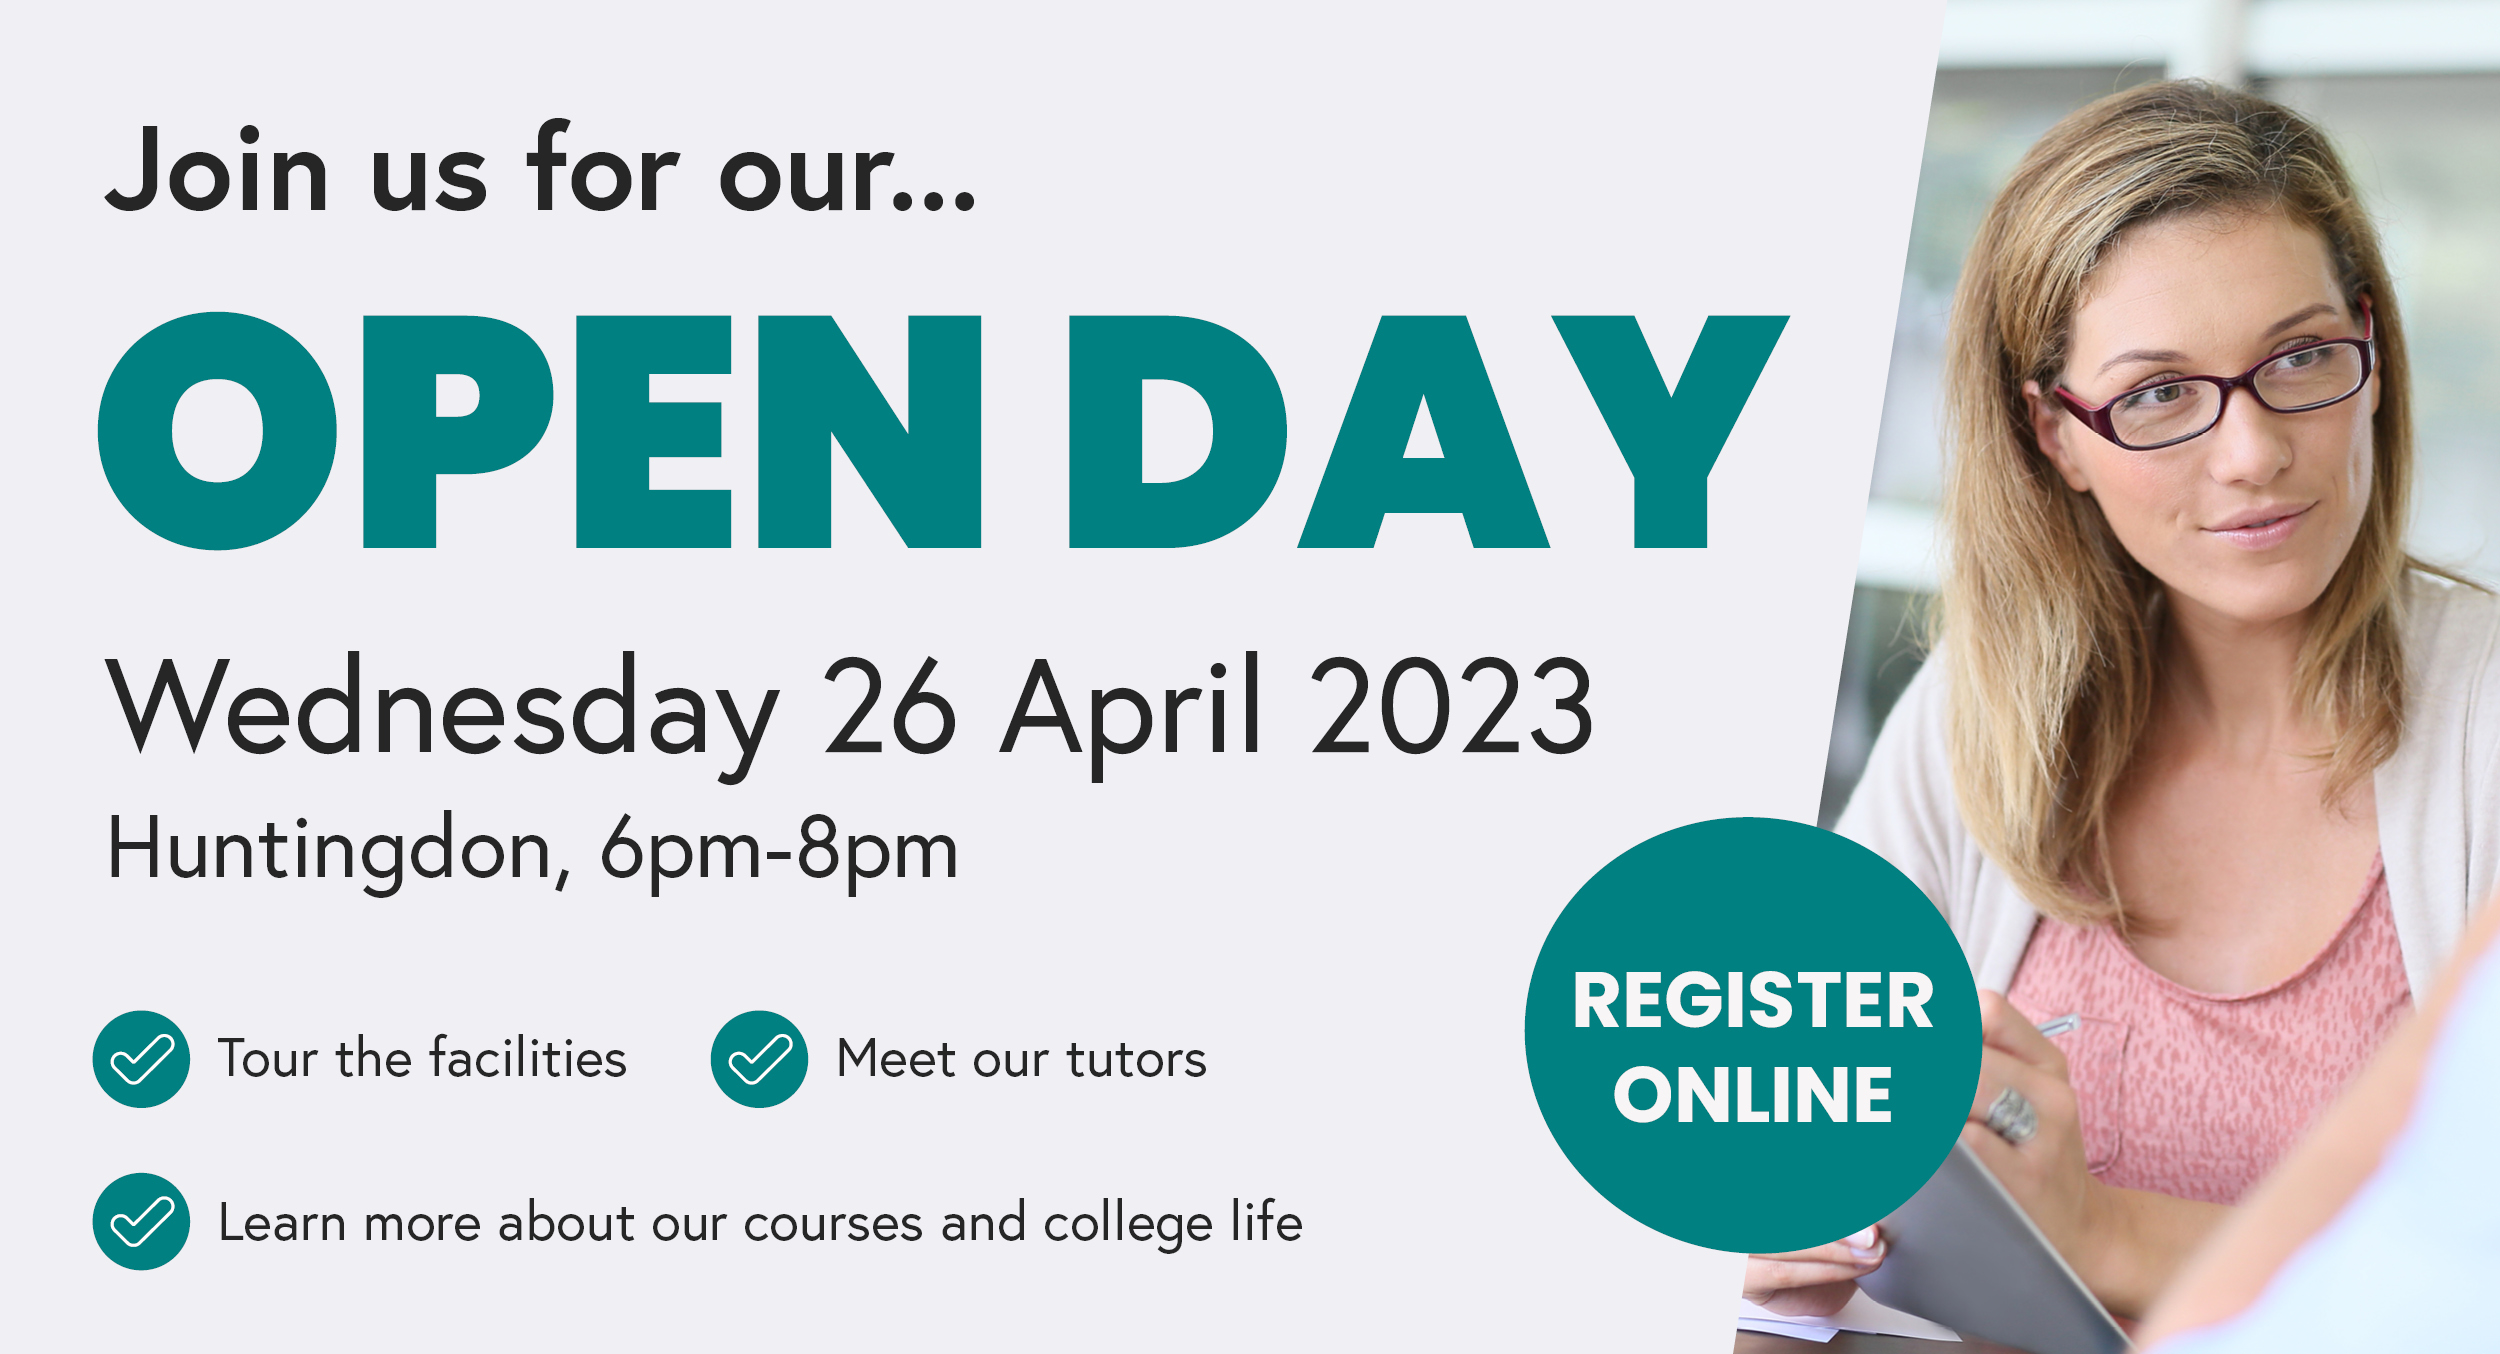 Join us for our Open Day on Wednesday 26 April at our Huntingdon centre!